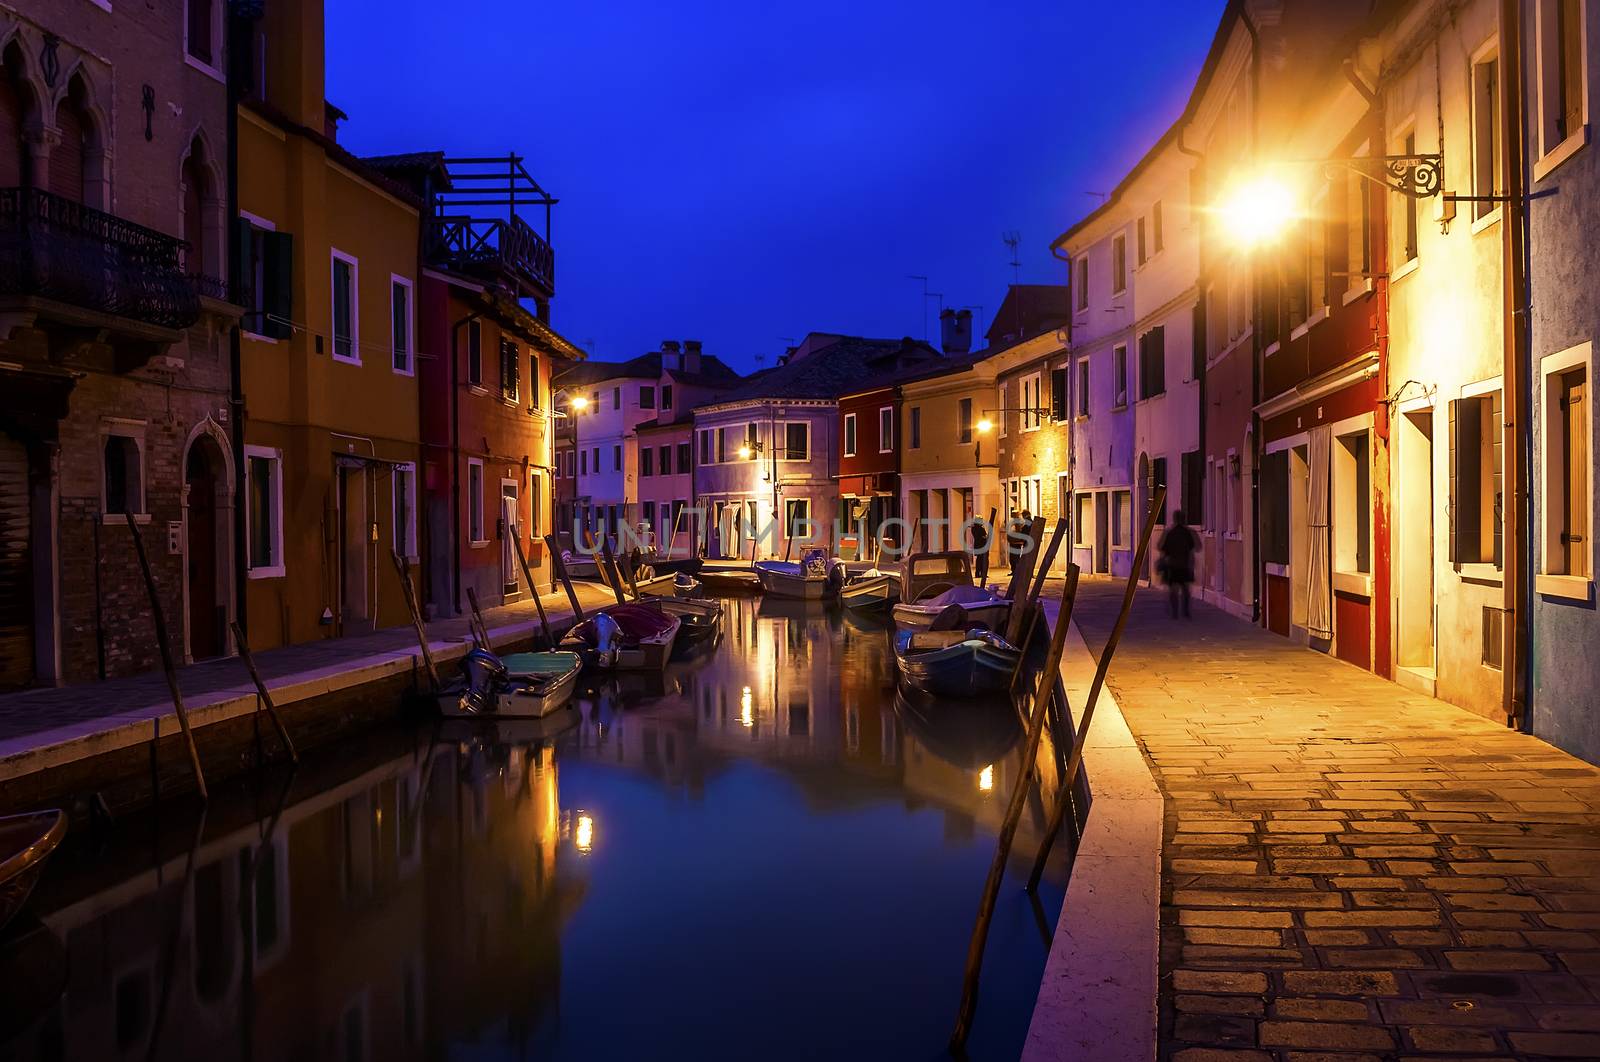 Beautiful evening cityscape of Burano island in Venice. Colored buildings are illuminated by street lights reflected in a water canal. Boats are parked there.